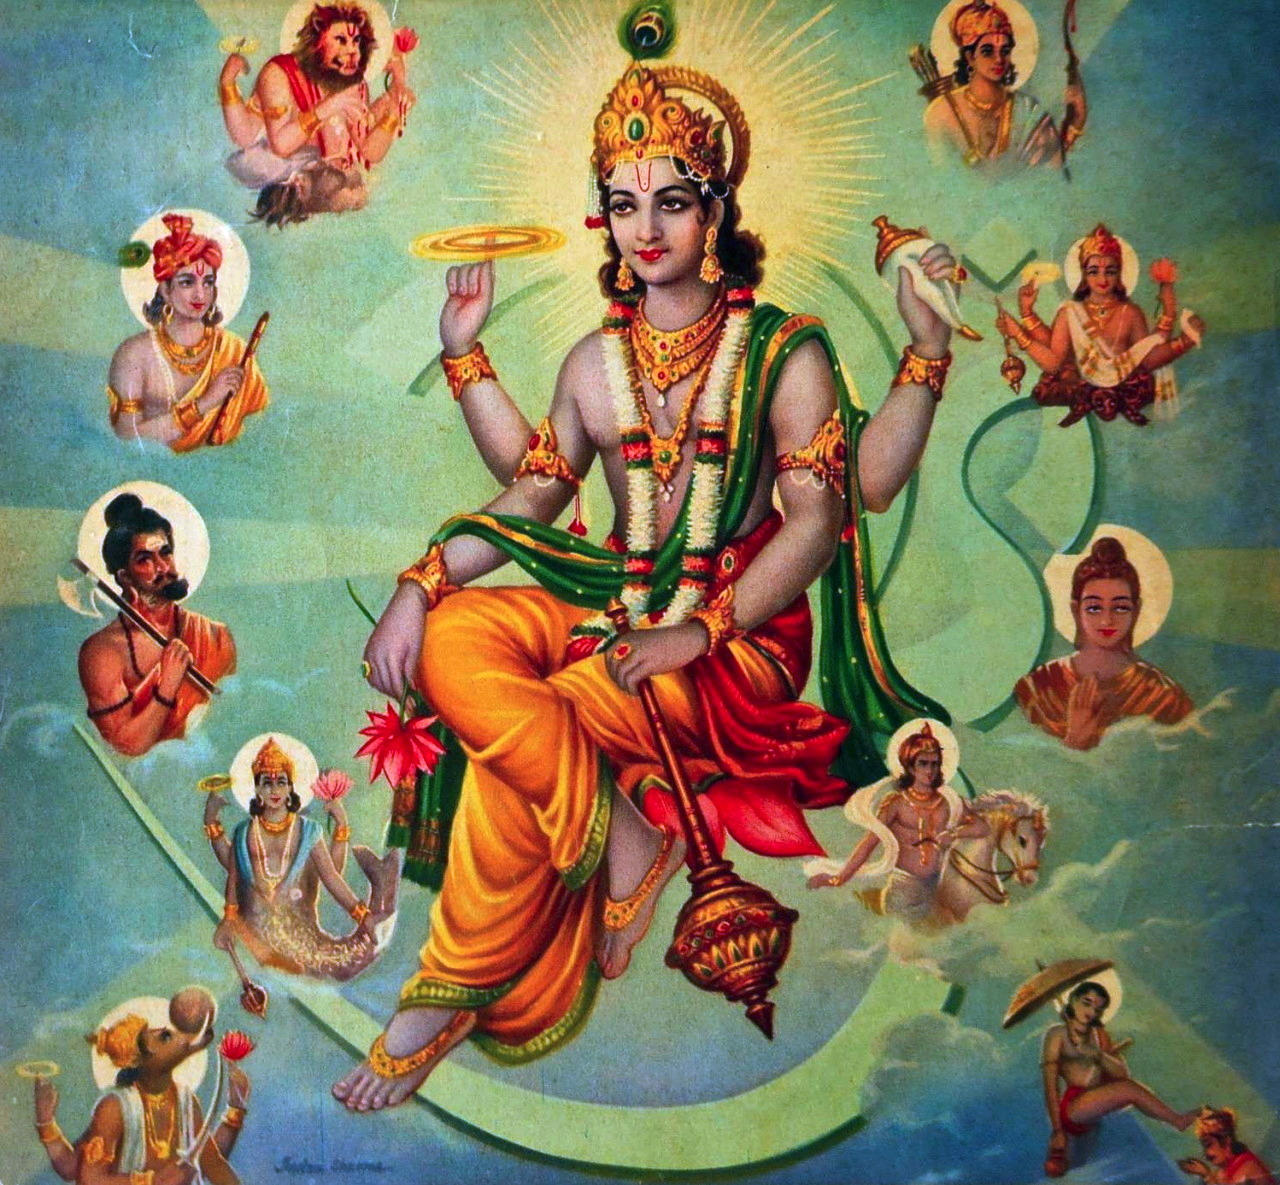 Incredible Collection of Lord Vishnu Images – Top 999+ Images in Full 4K Quality